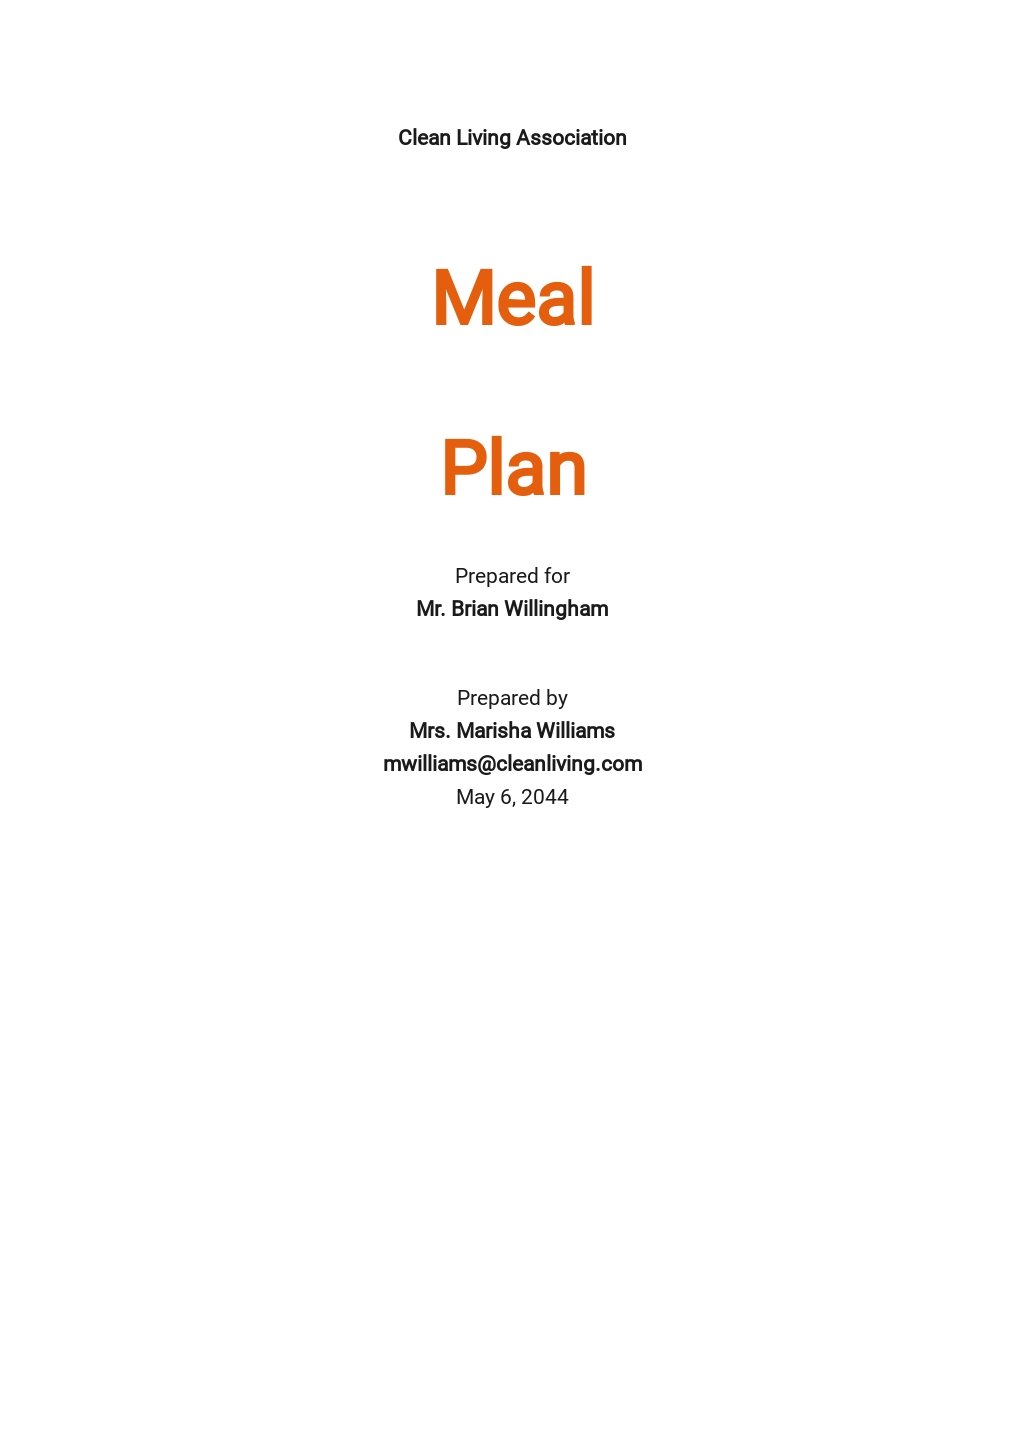 Free Meal Plan Word Templates, 20+ Download | Template.net